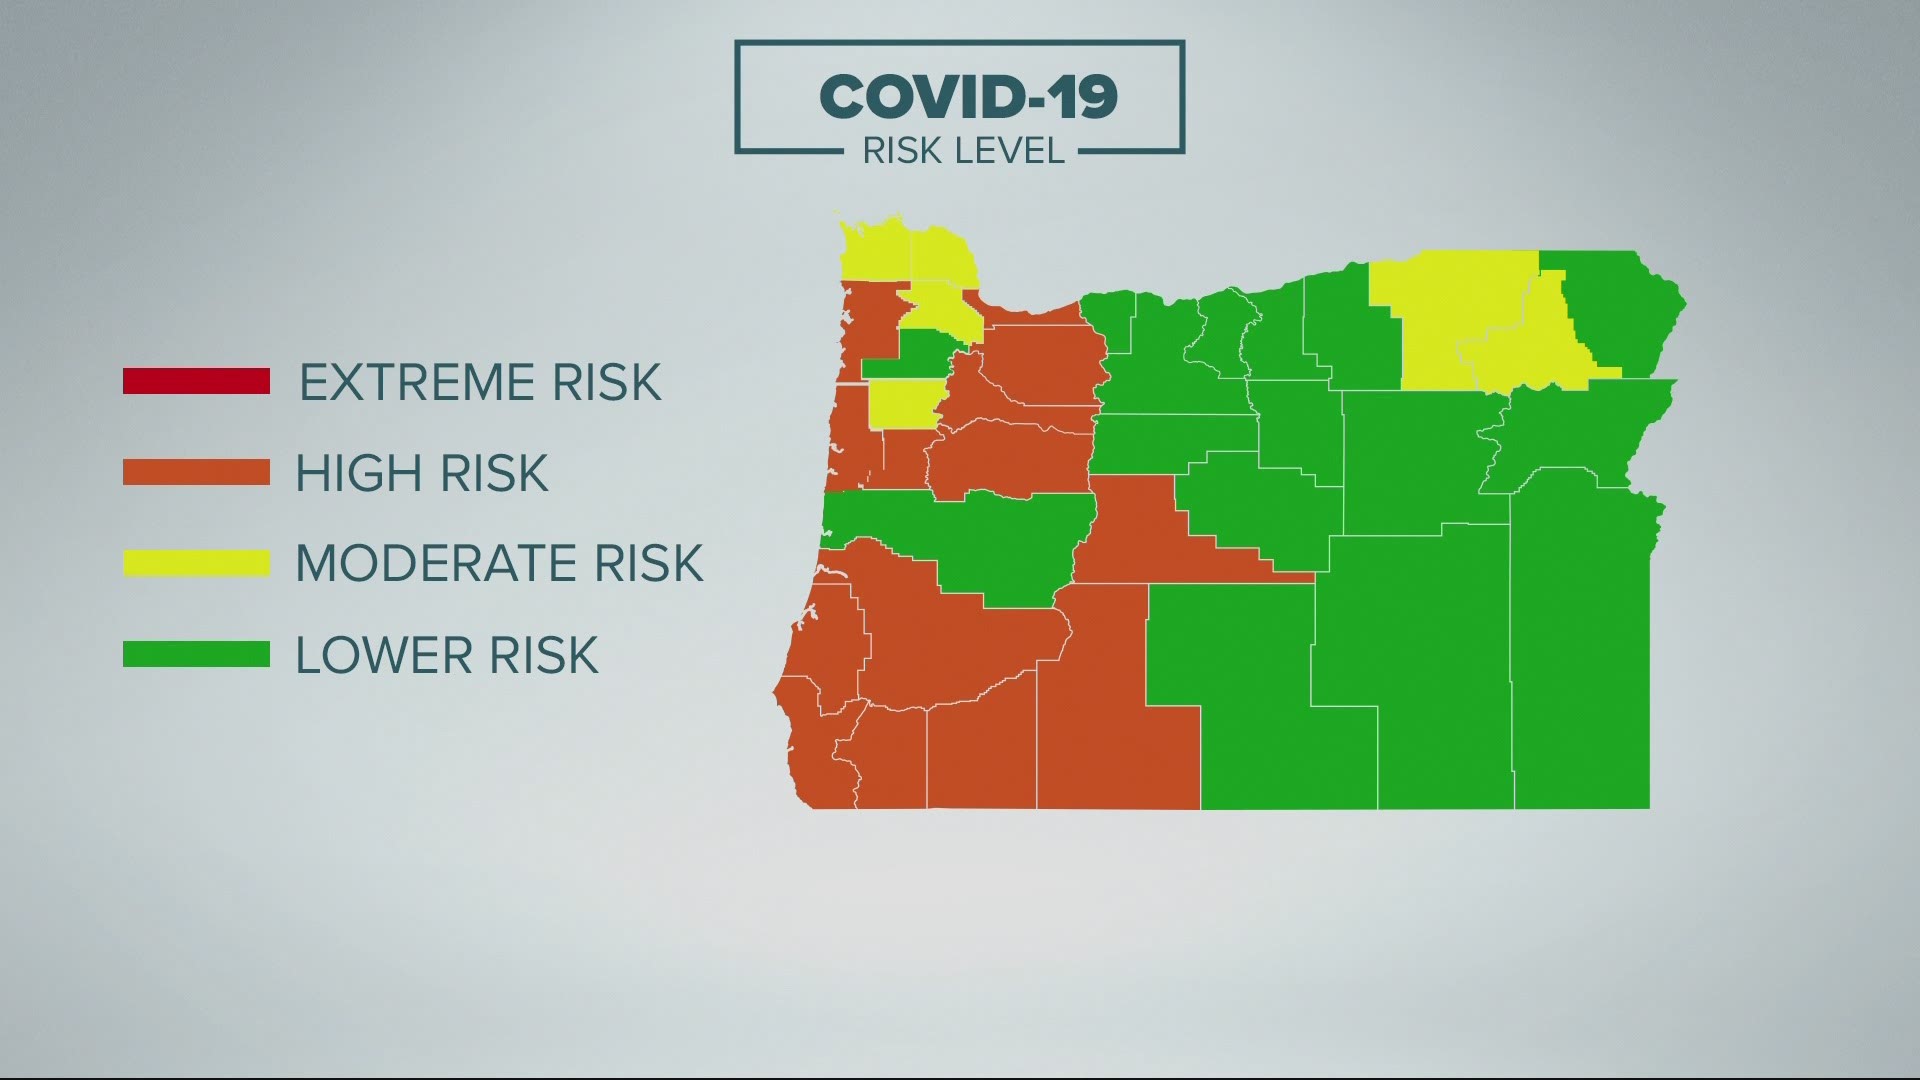 Six Oregon counties, including Multnomah and Clackamas, will move from moderate risk to high risk when the state’s new COVID-19 risk levels begin on Friday, April 9.